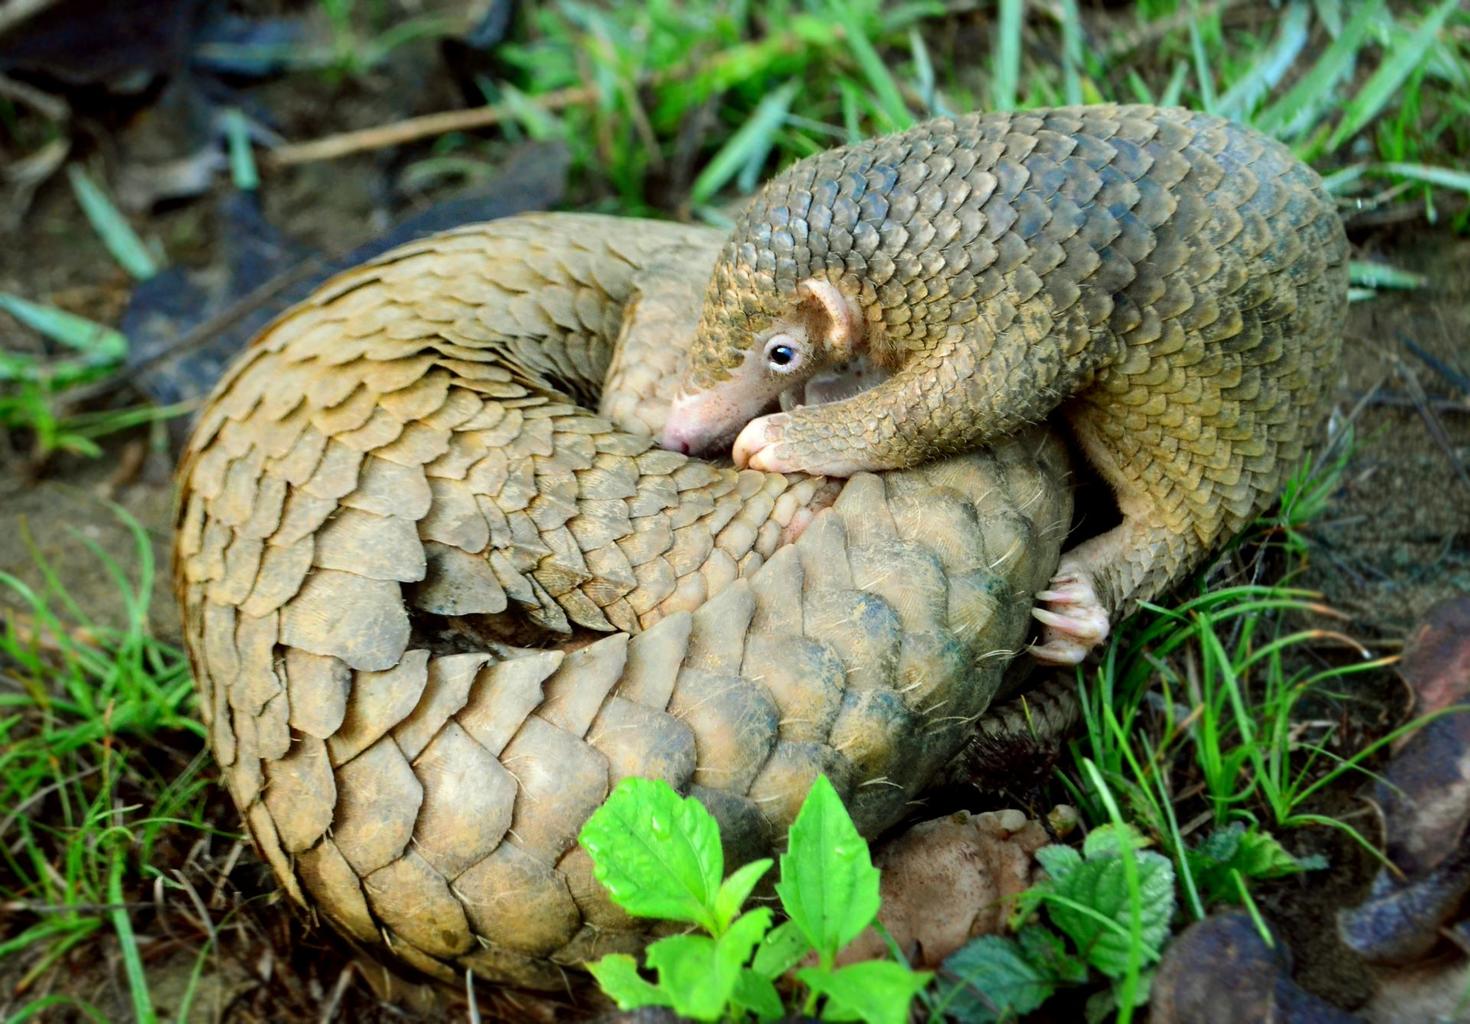 Philippine Pangolin curled up